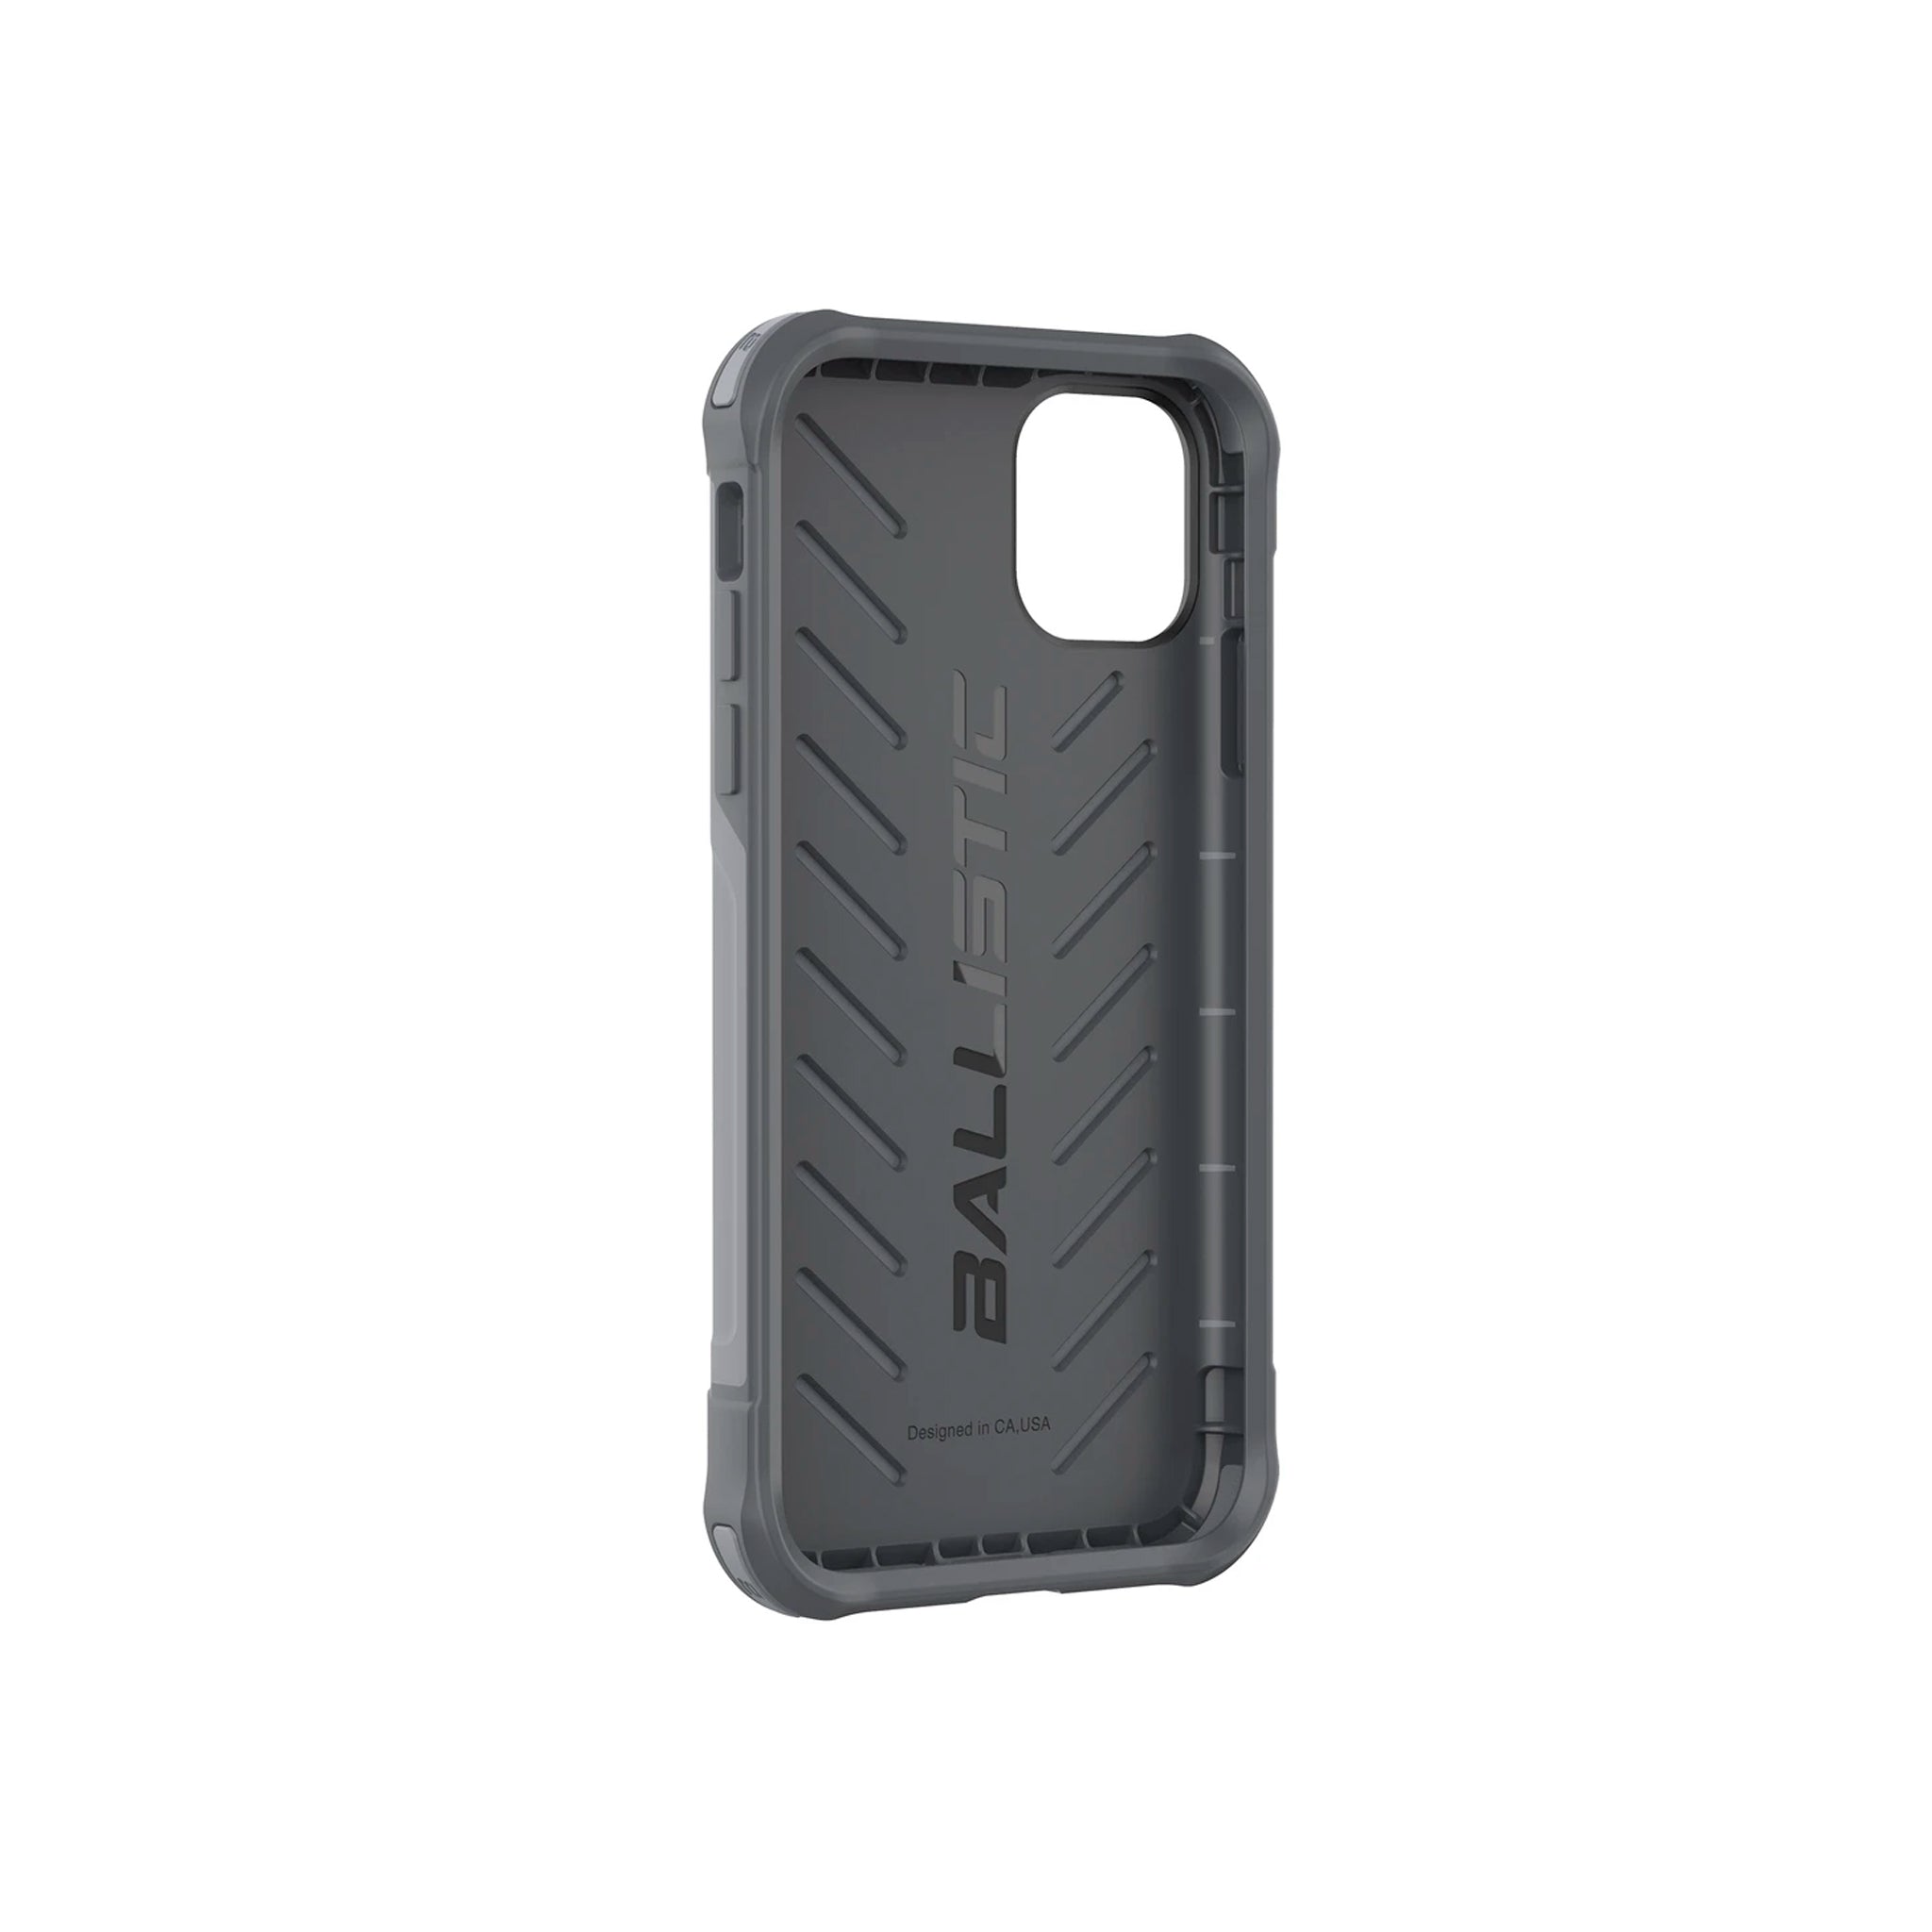 Ballistic - Tough Jacket Series For iPhone 11 Pro Max - Gray